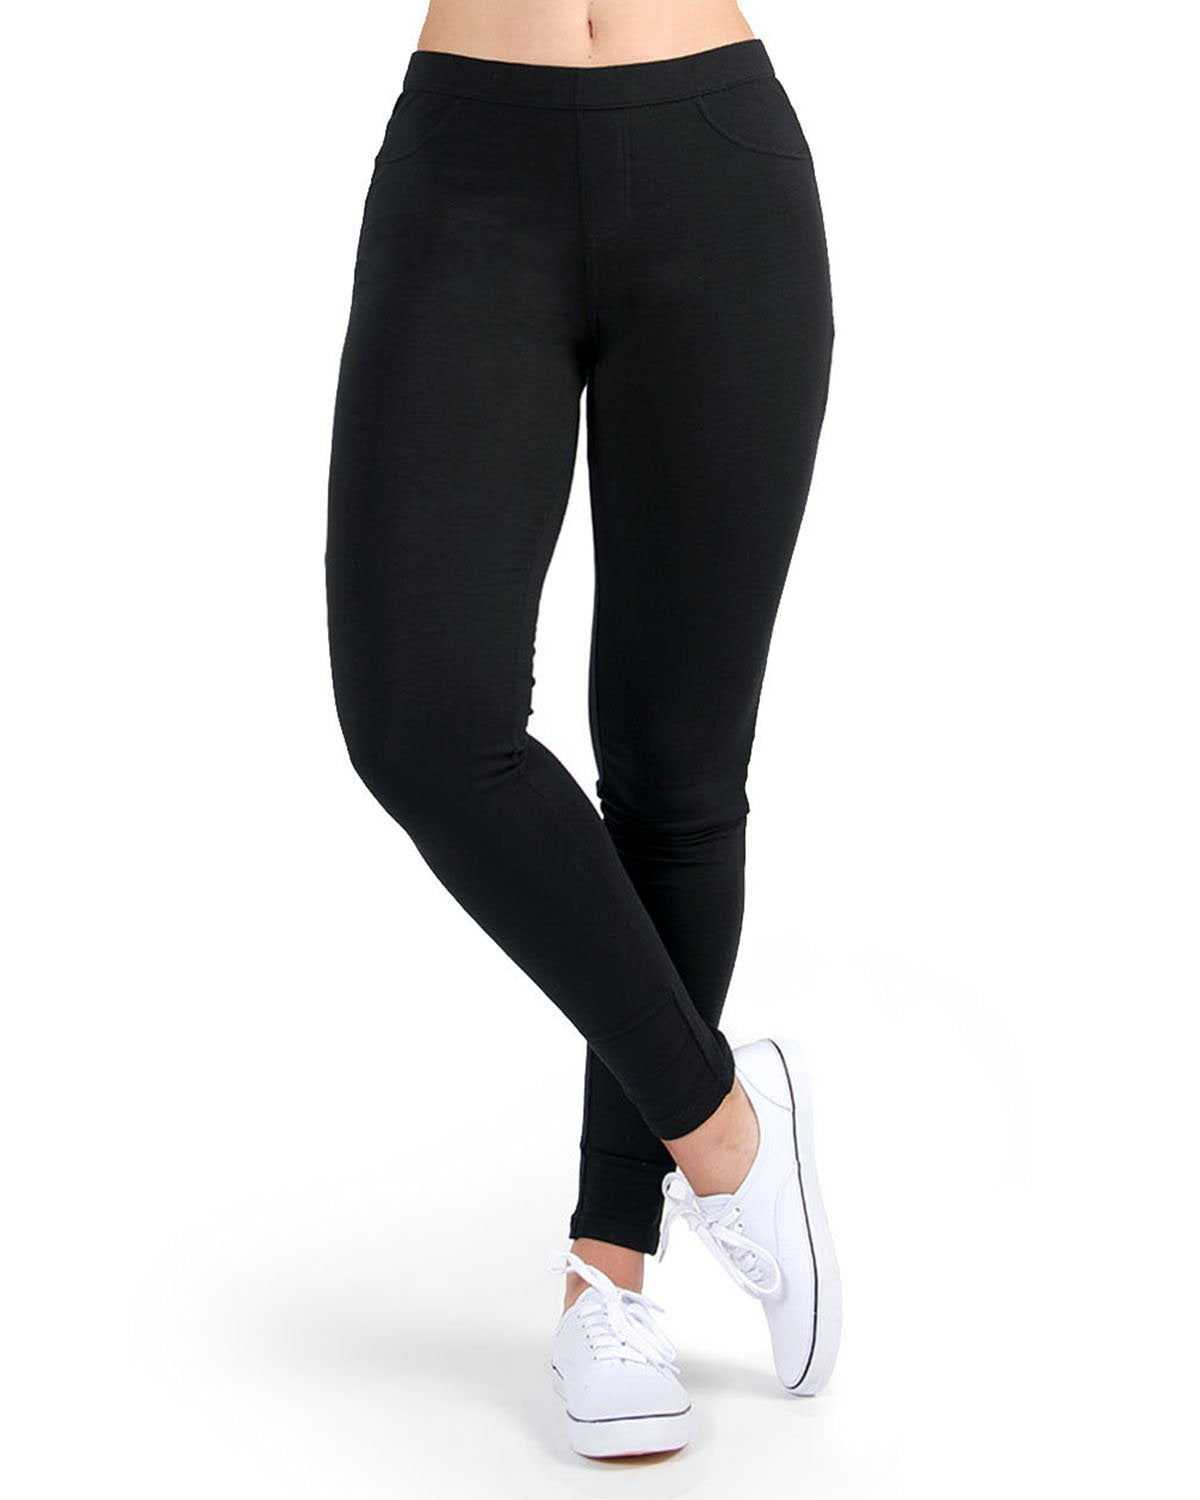 earth creations - 2286 Cozy Legging - 66% rayon of bamboo origin / 28%  organic cotton / 6% spandex french terry - Made in the U.S.A